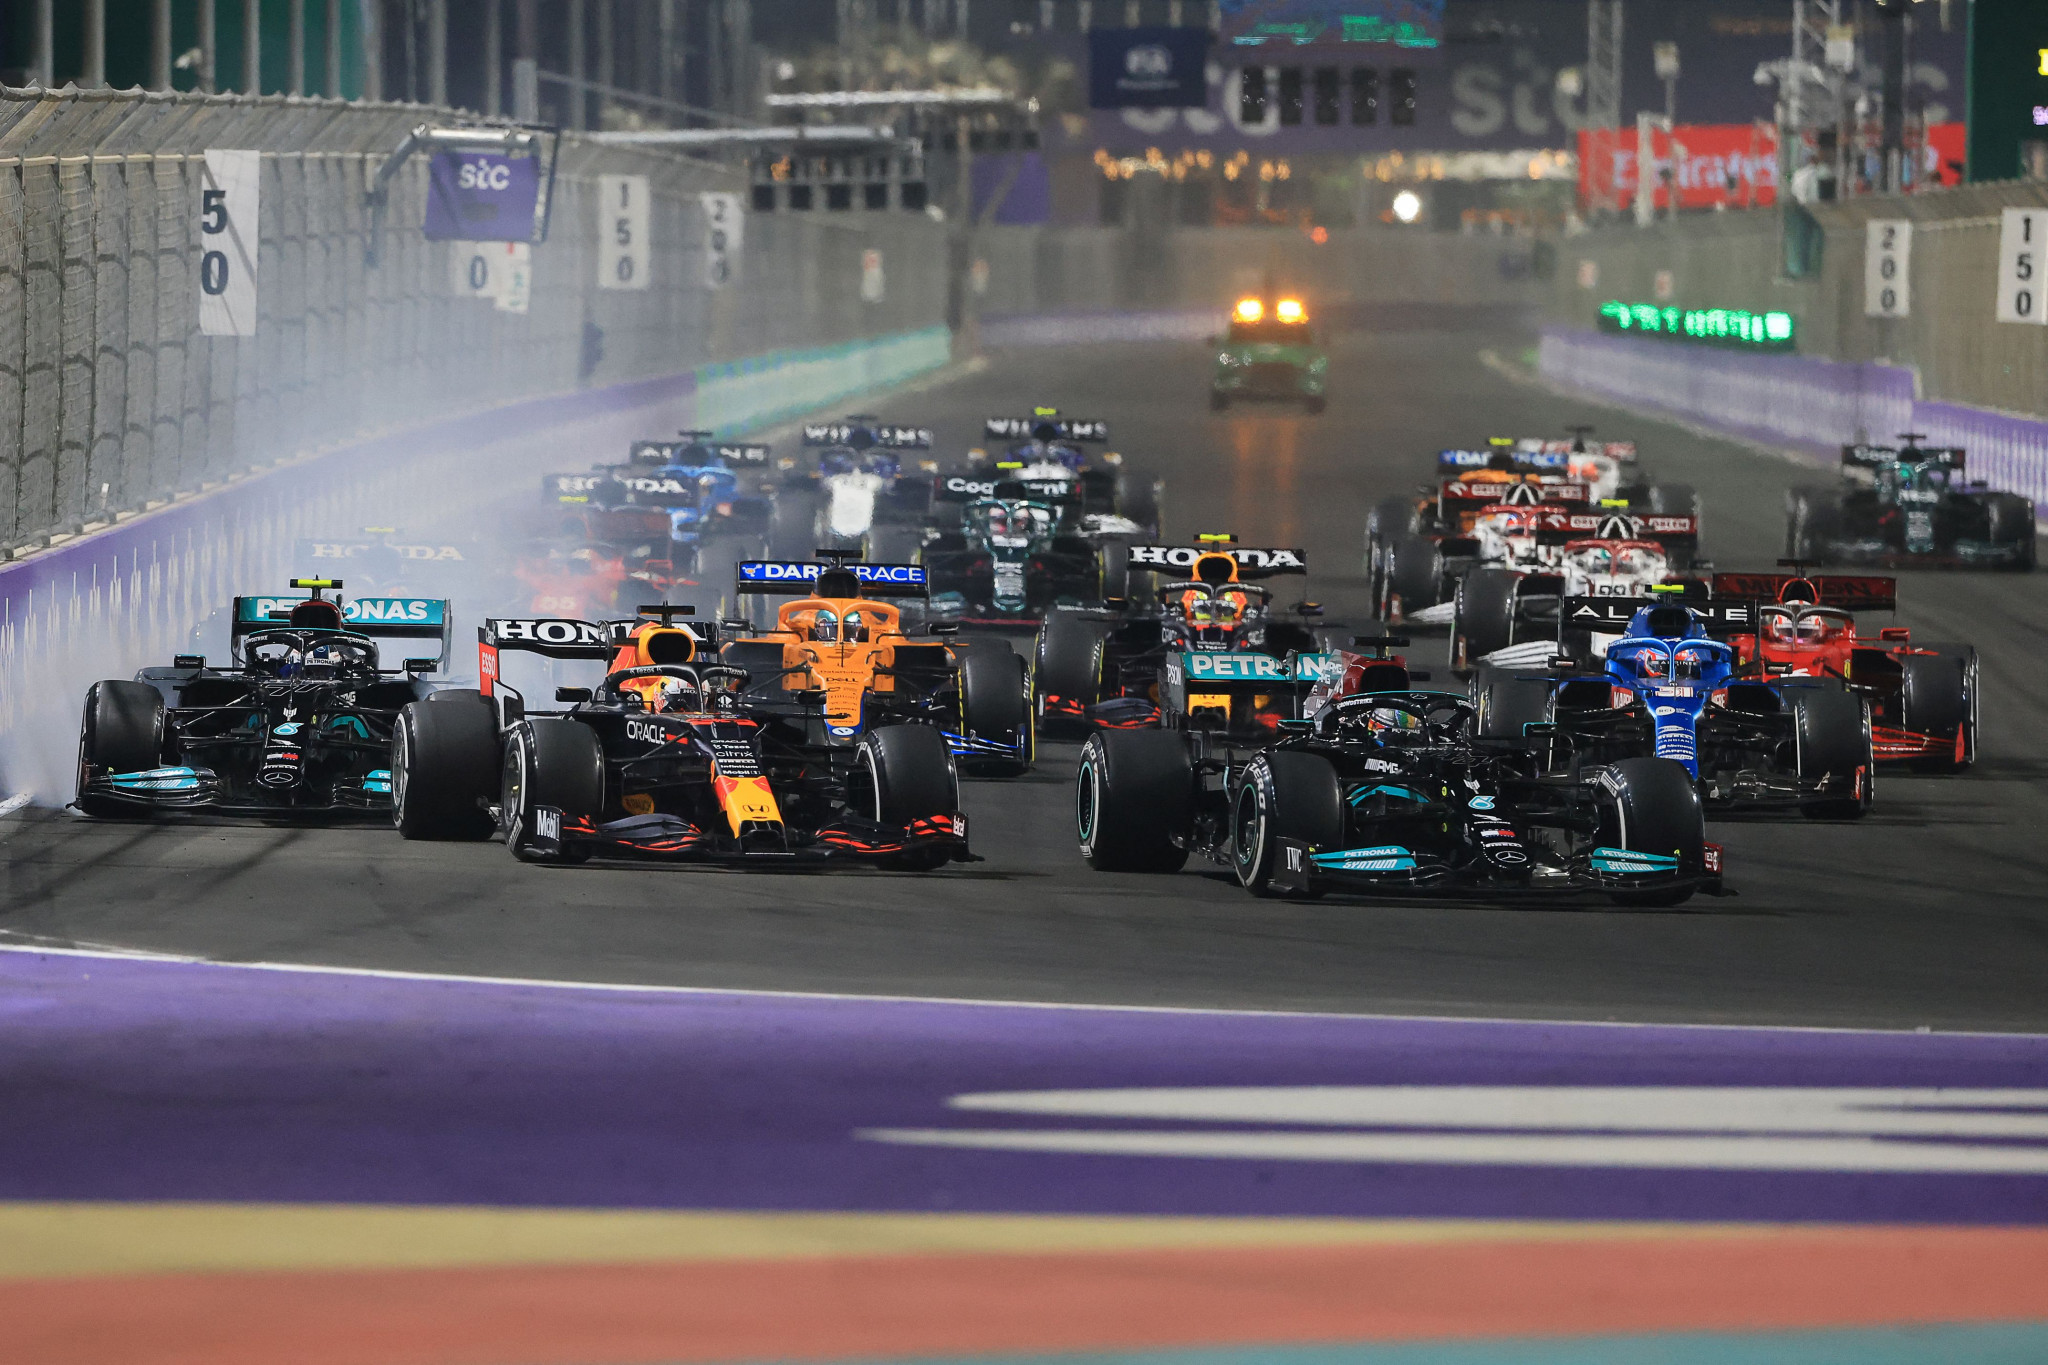 The Formula One Saudi Arabian Grand Prix was held for the first time in 2021 ©Getty Images